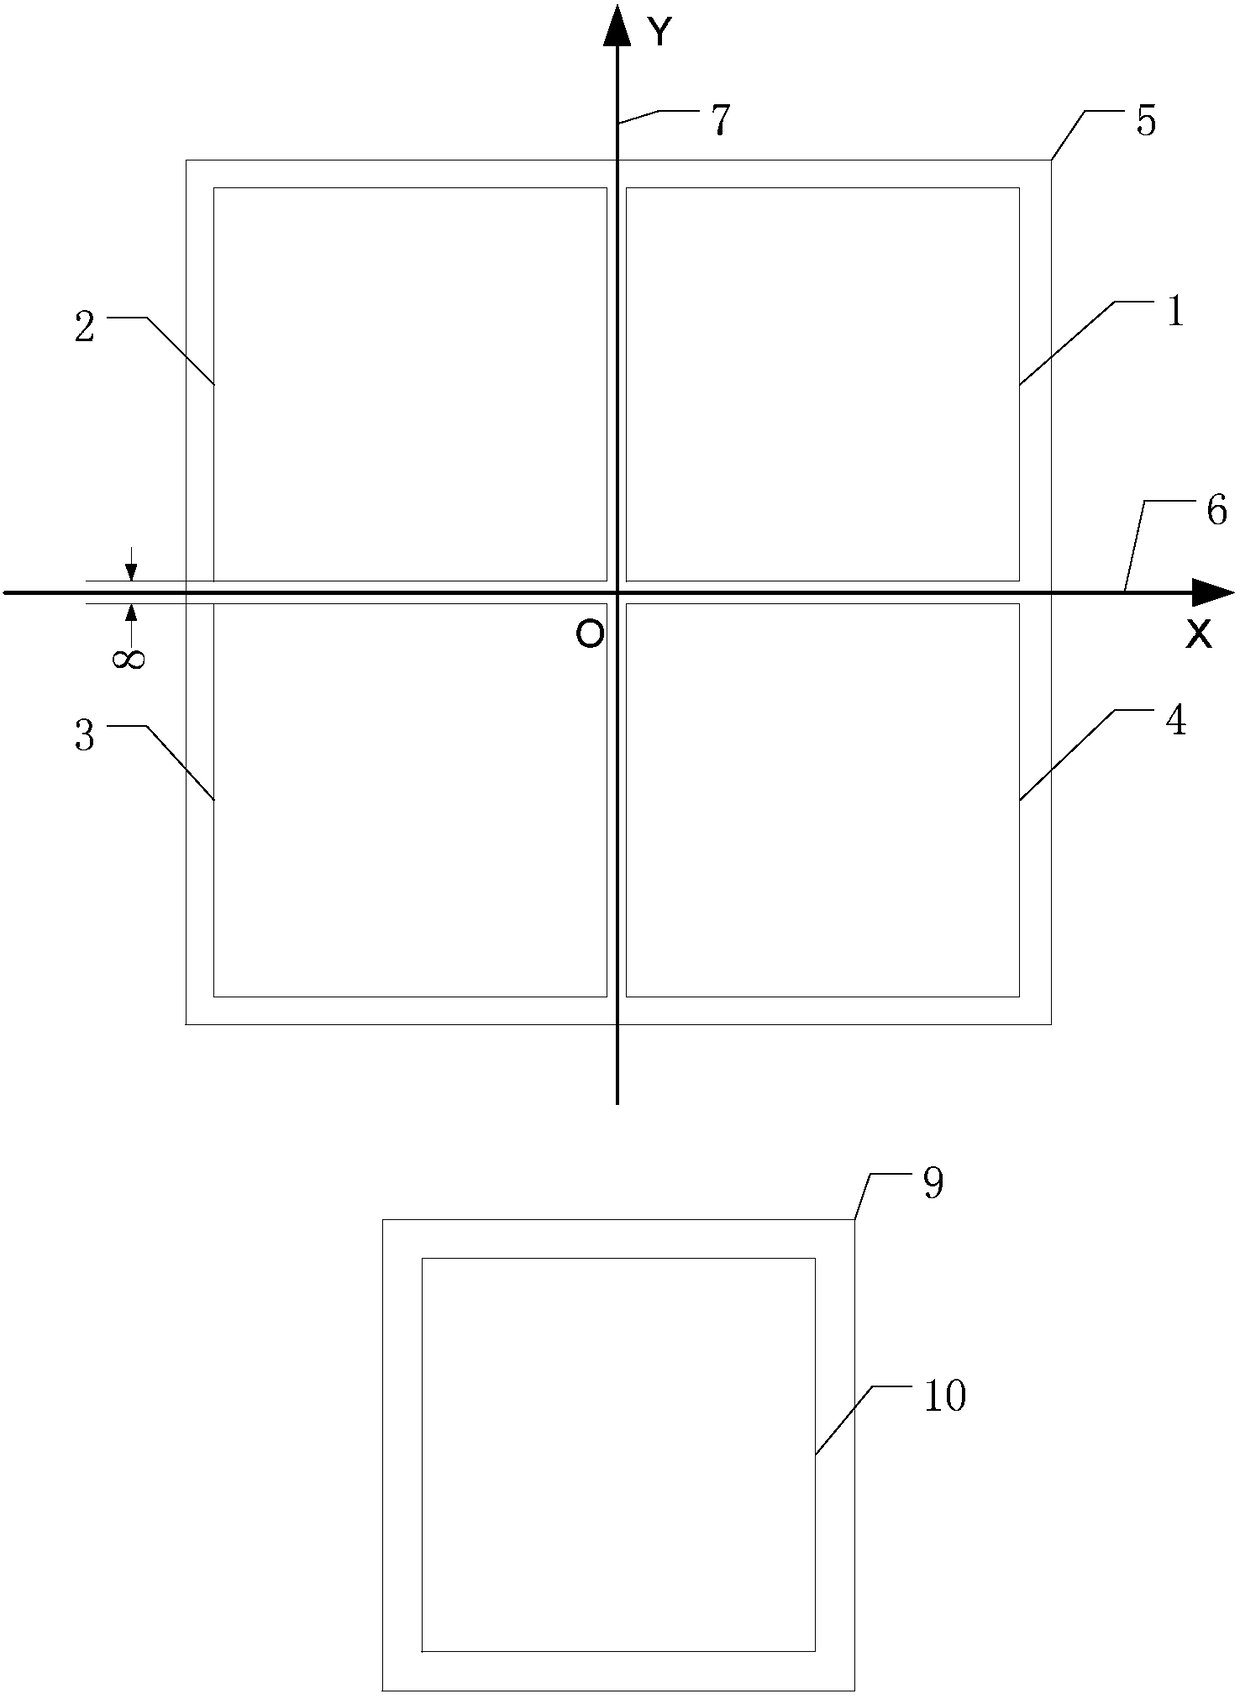 A three-degree-of-freedom linear displacement detection method